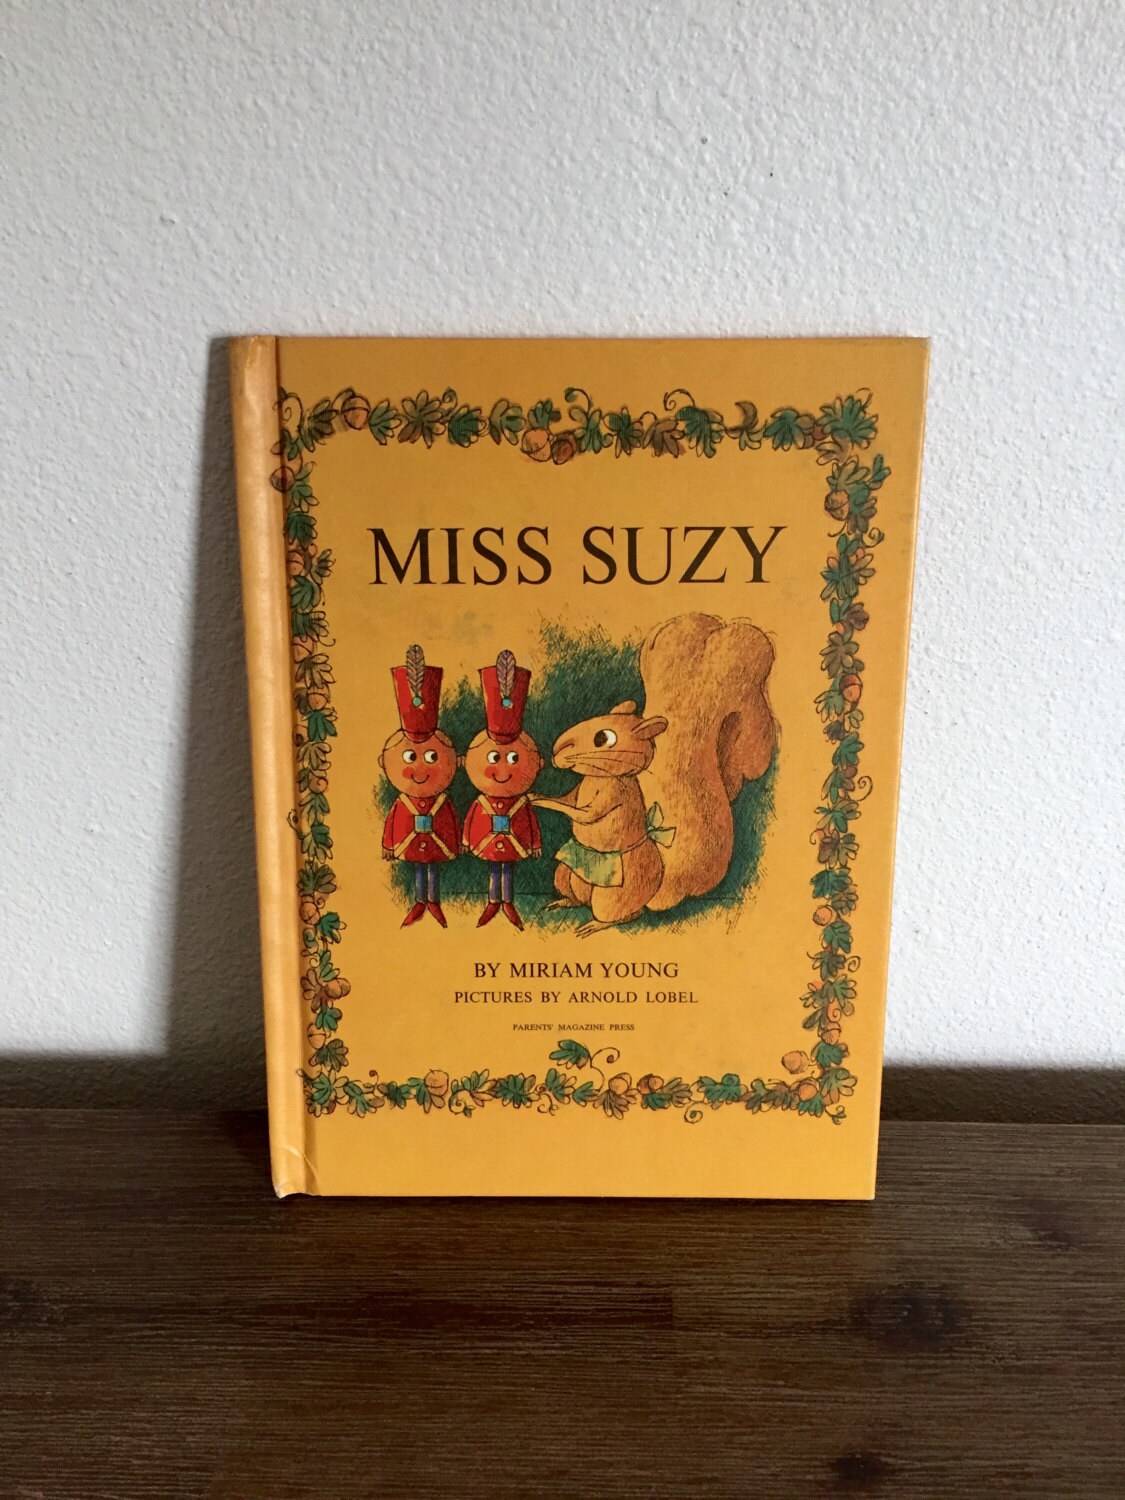 miss suzy by miriam young